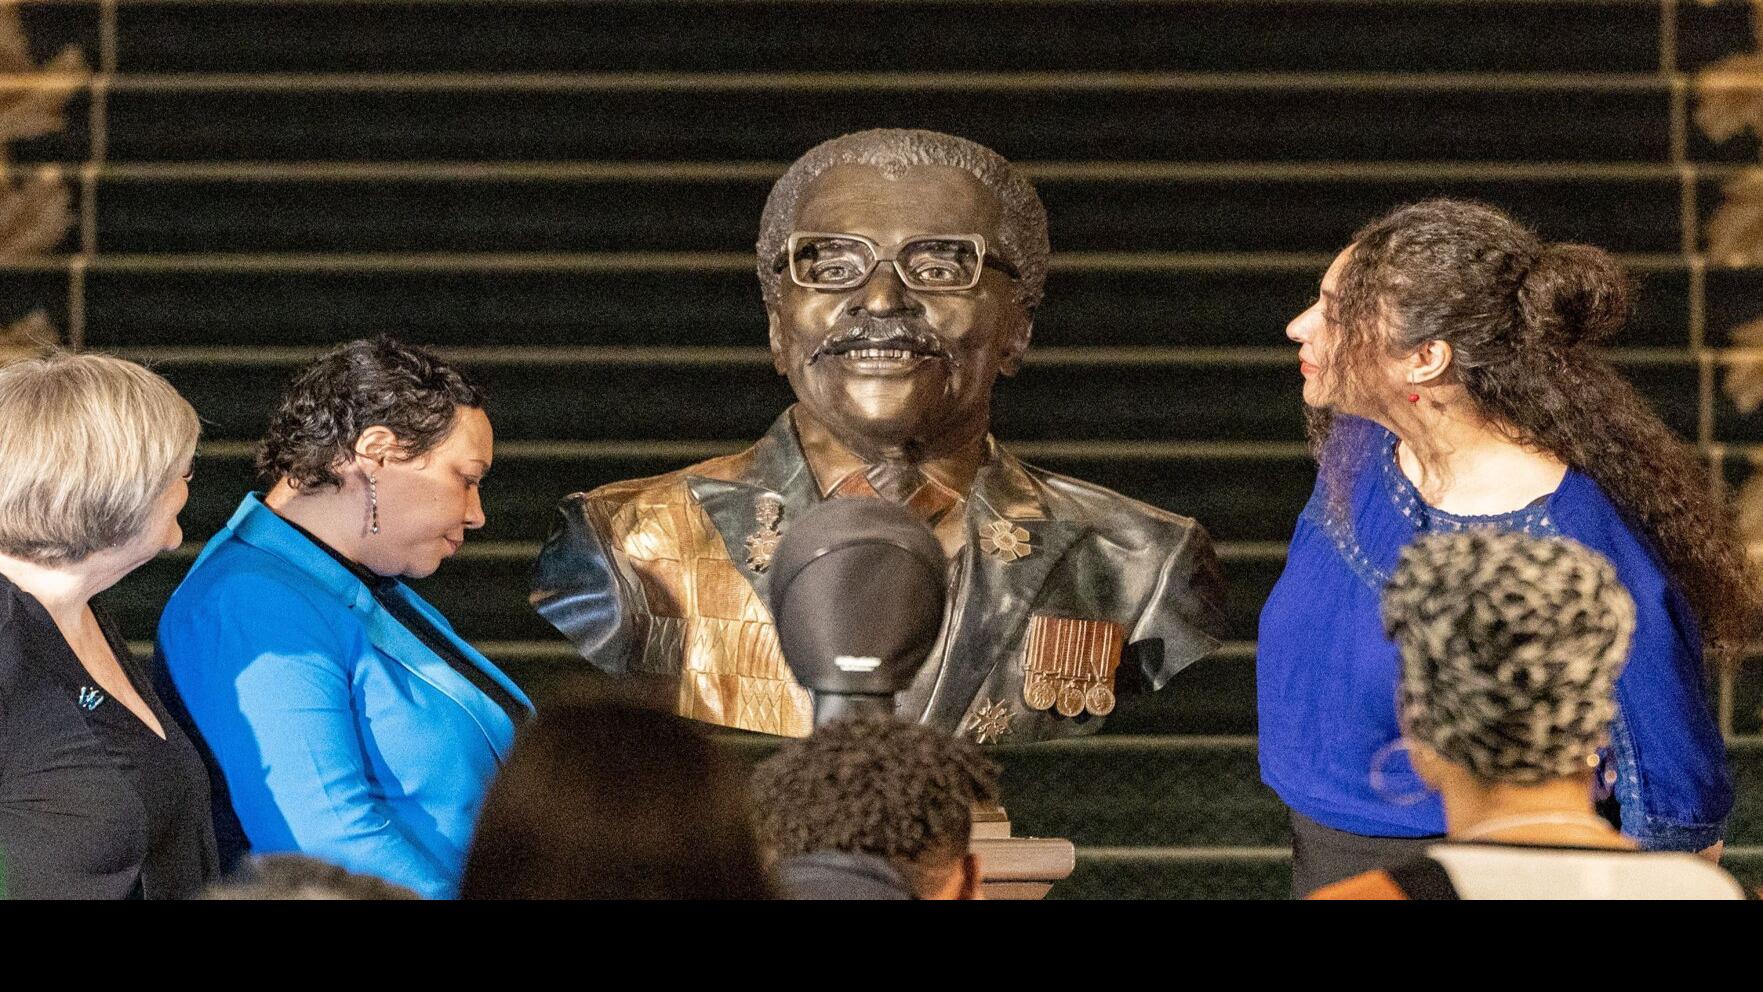 Bust of Lincoln Alexander, Canada's 1st Black MP and former Ontario LG,  unveiled at Queen's Park